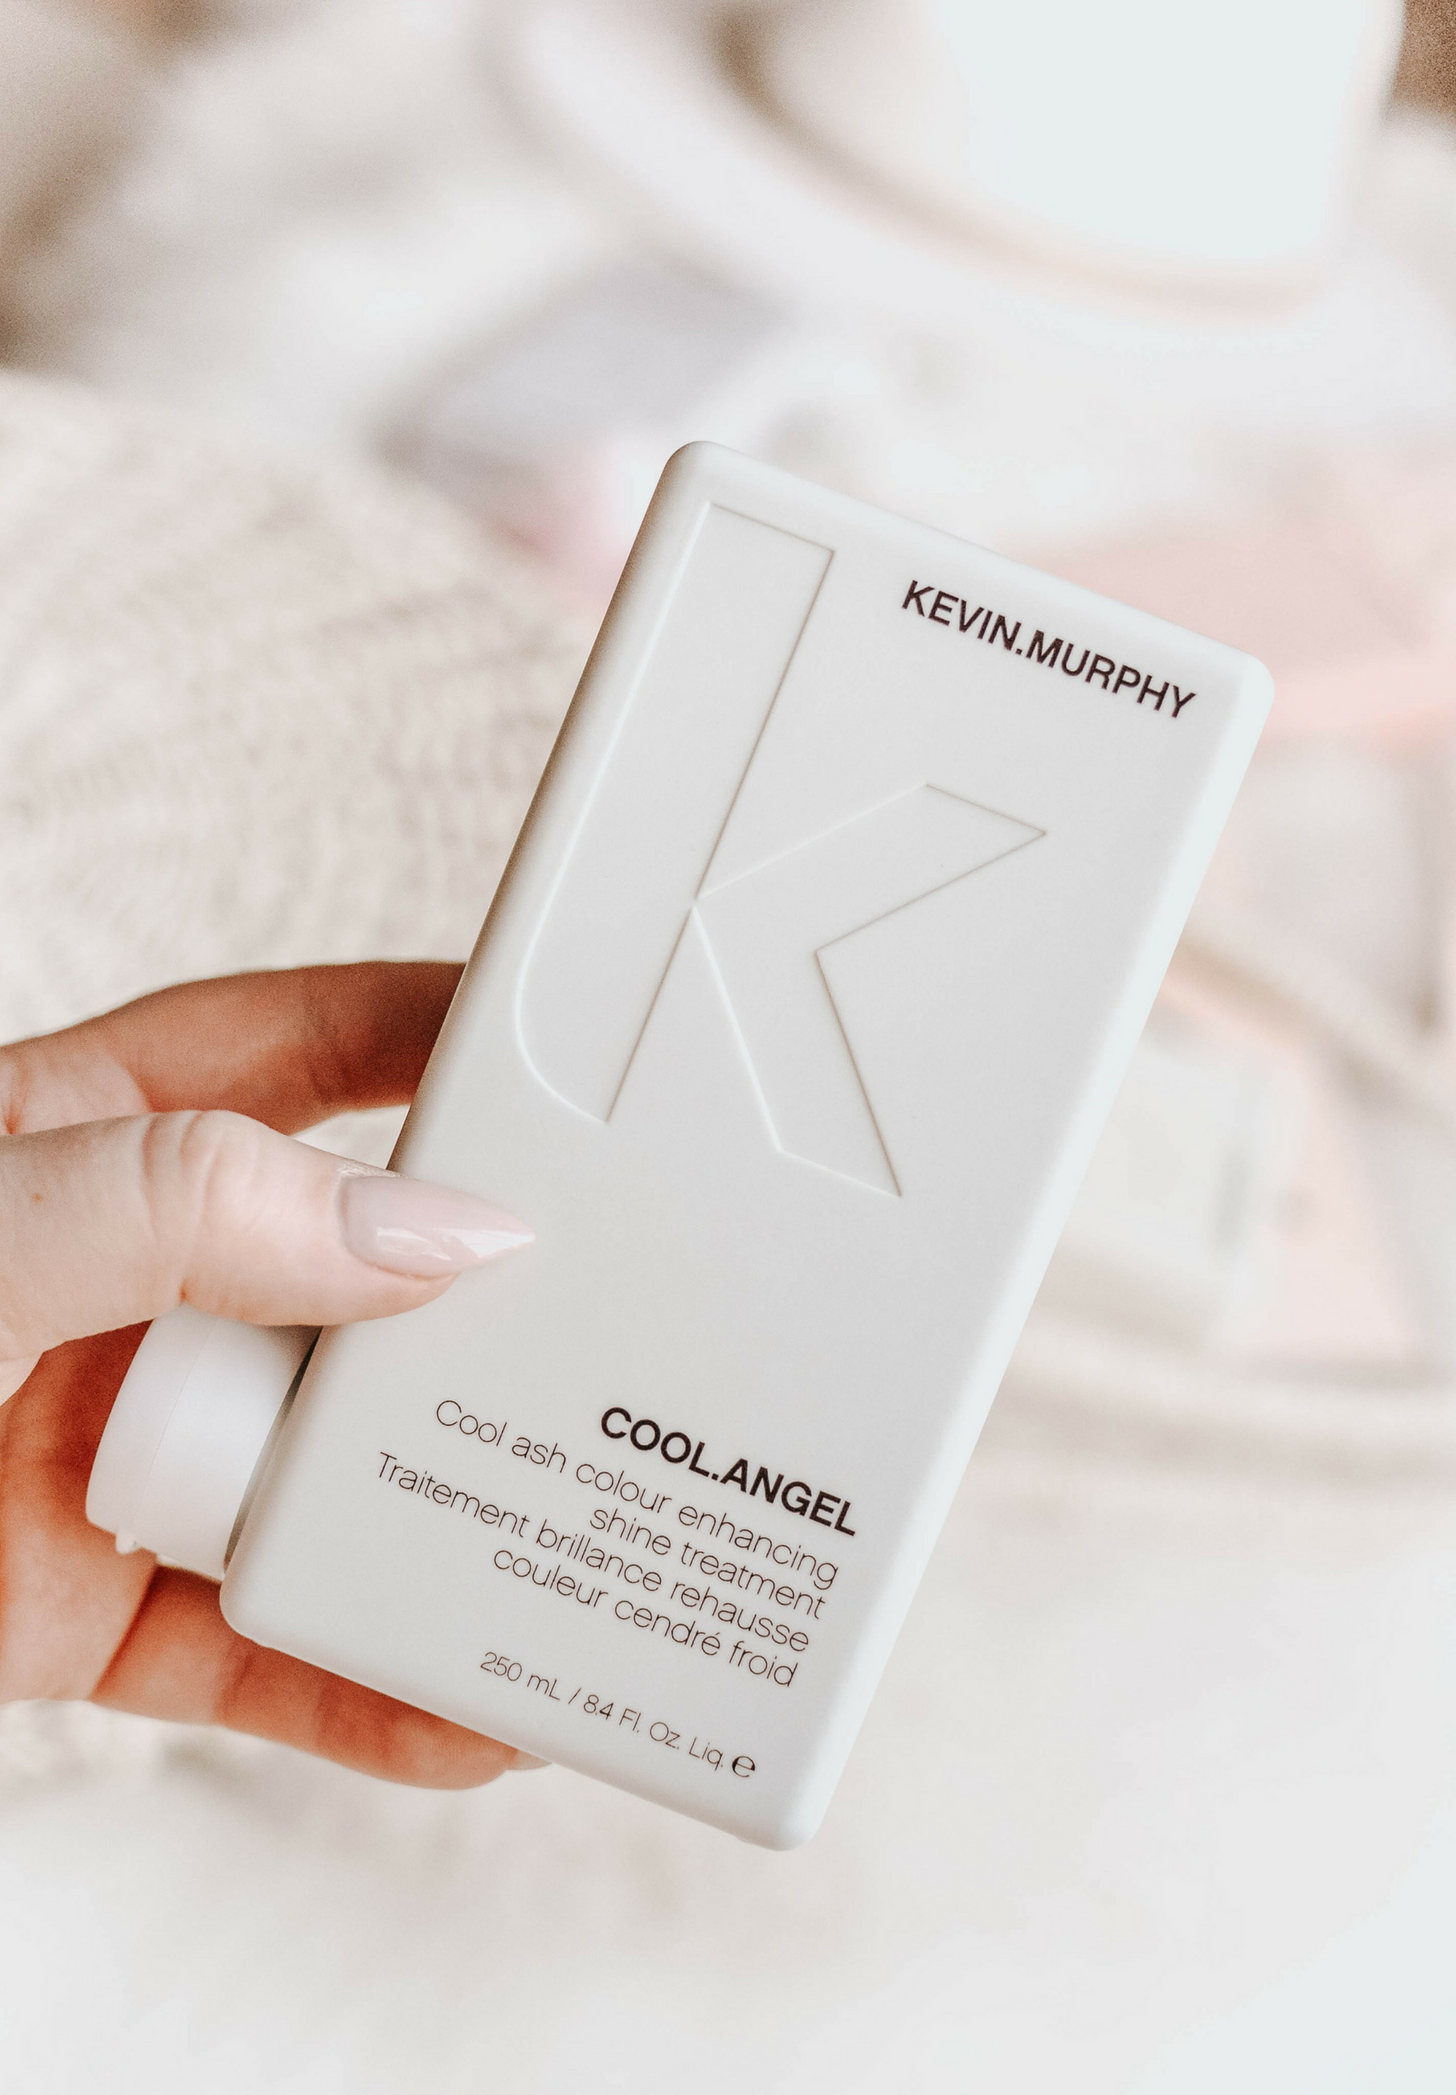 kevin murphy colouring angels